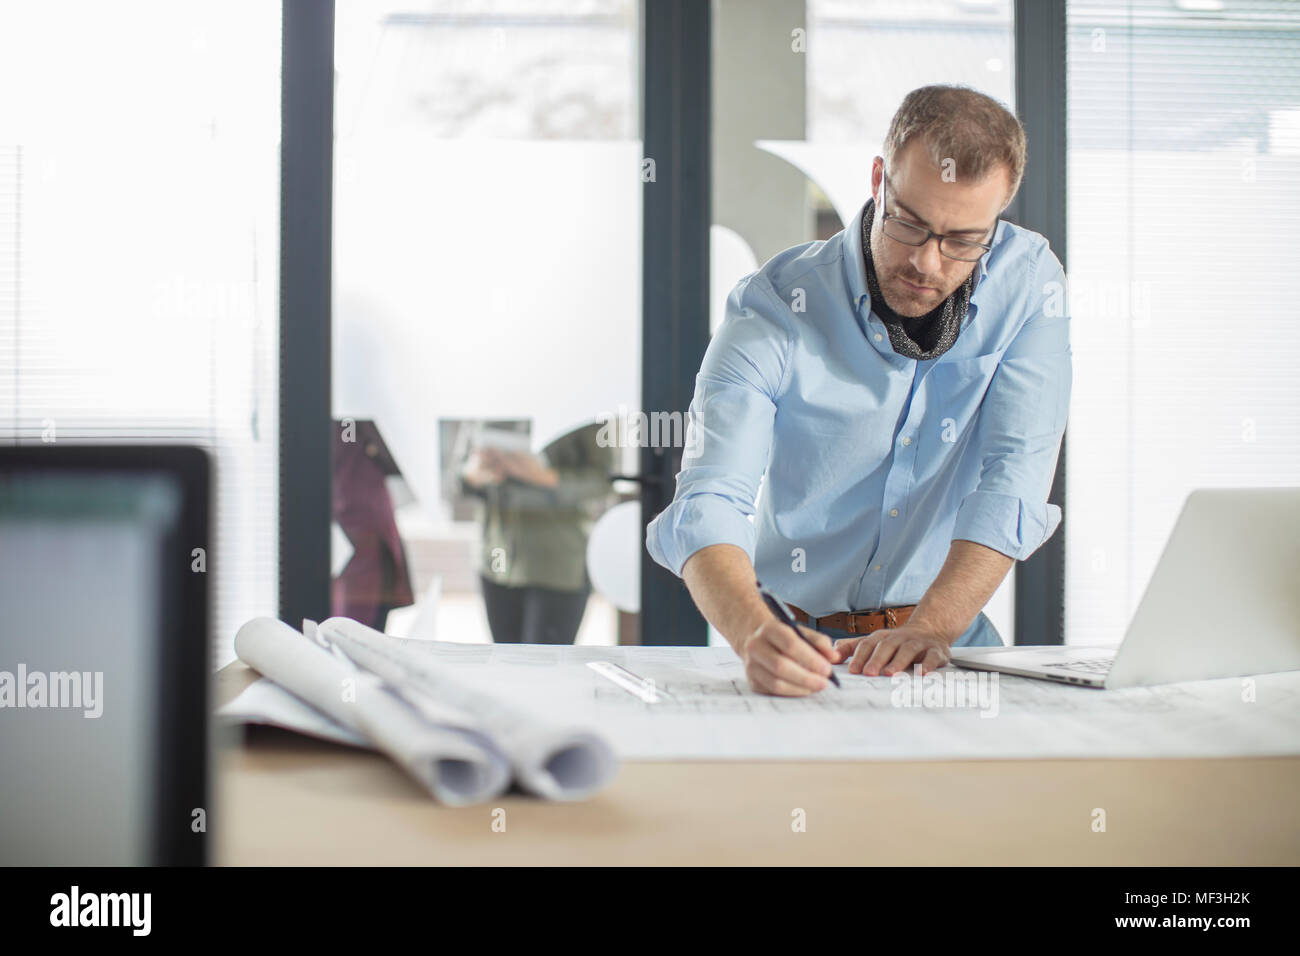 Man making notes on plan in office Stock Photo